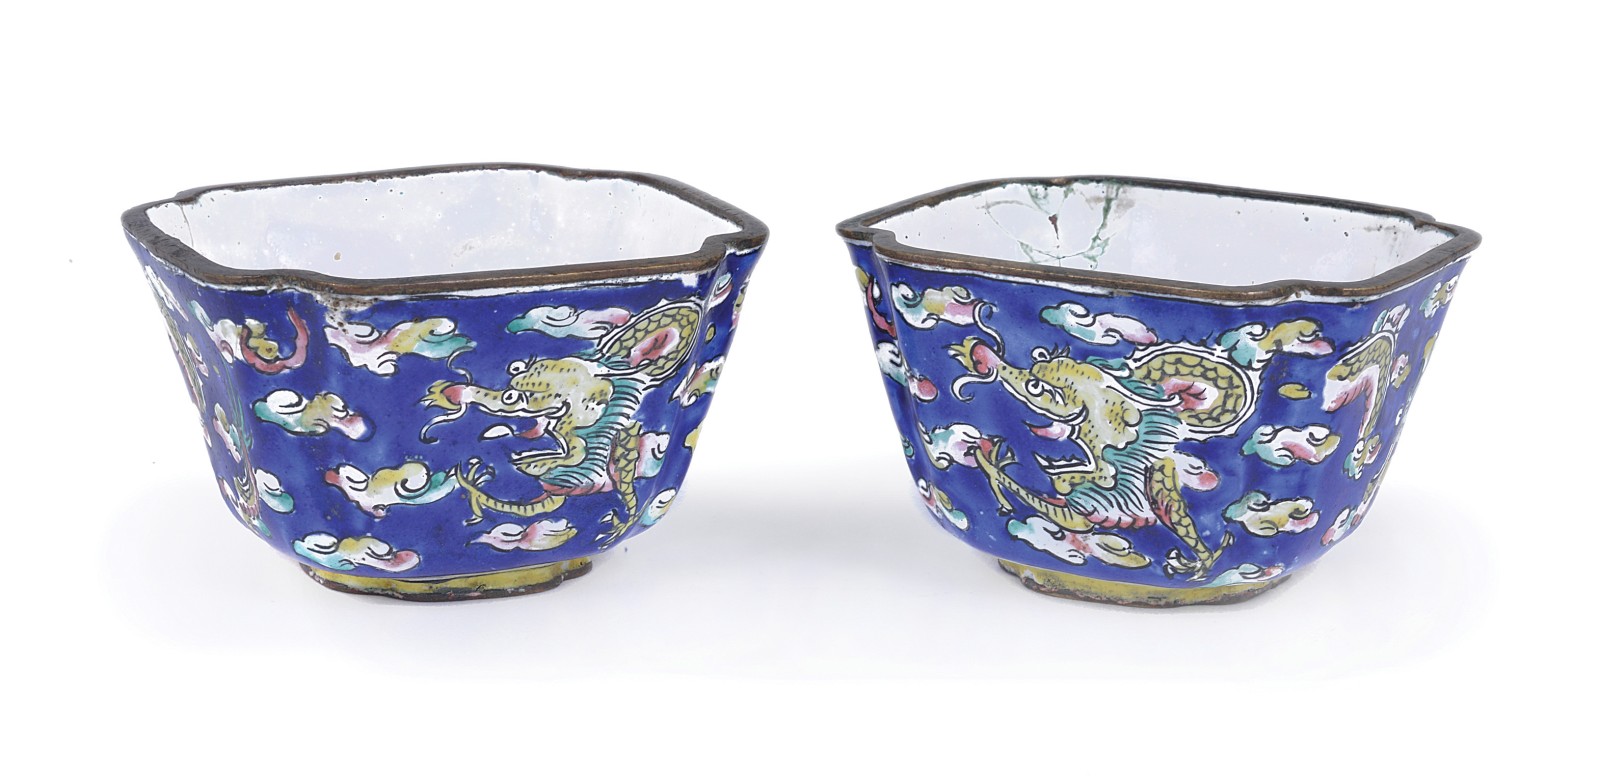 A PAIR OF CHINESE CANTON ENAMEL WINE CUPS, 19TH CENTURY with a blue ground decorated with flying